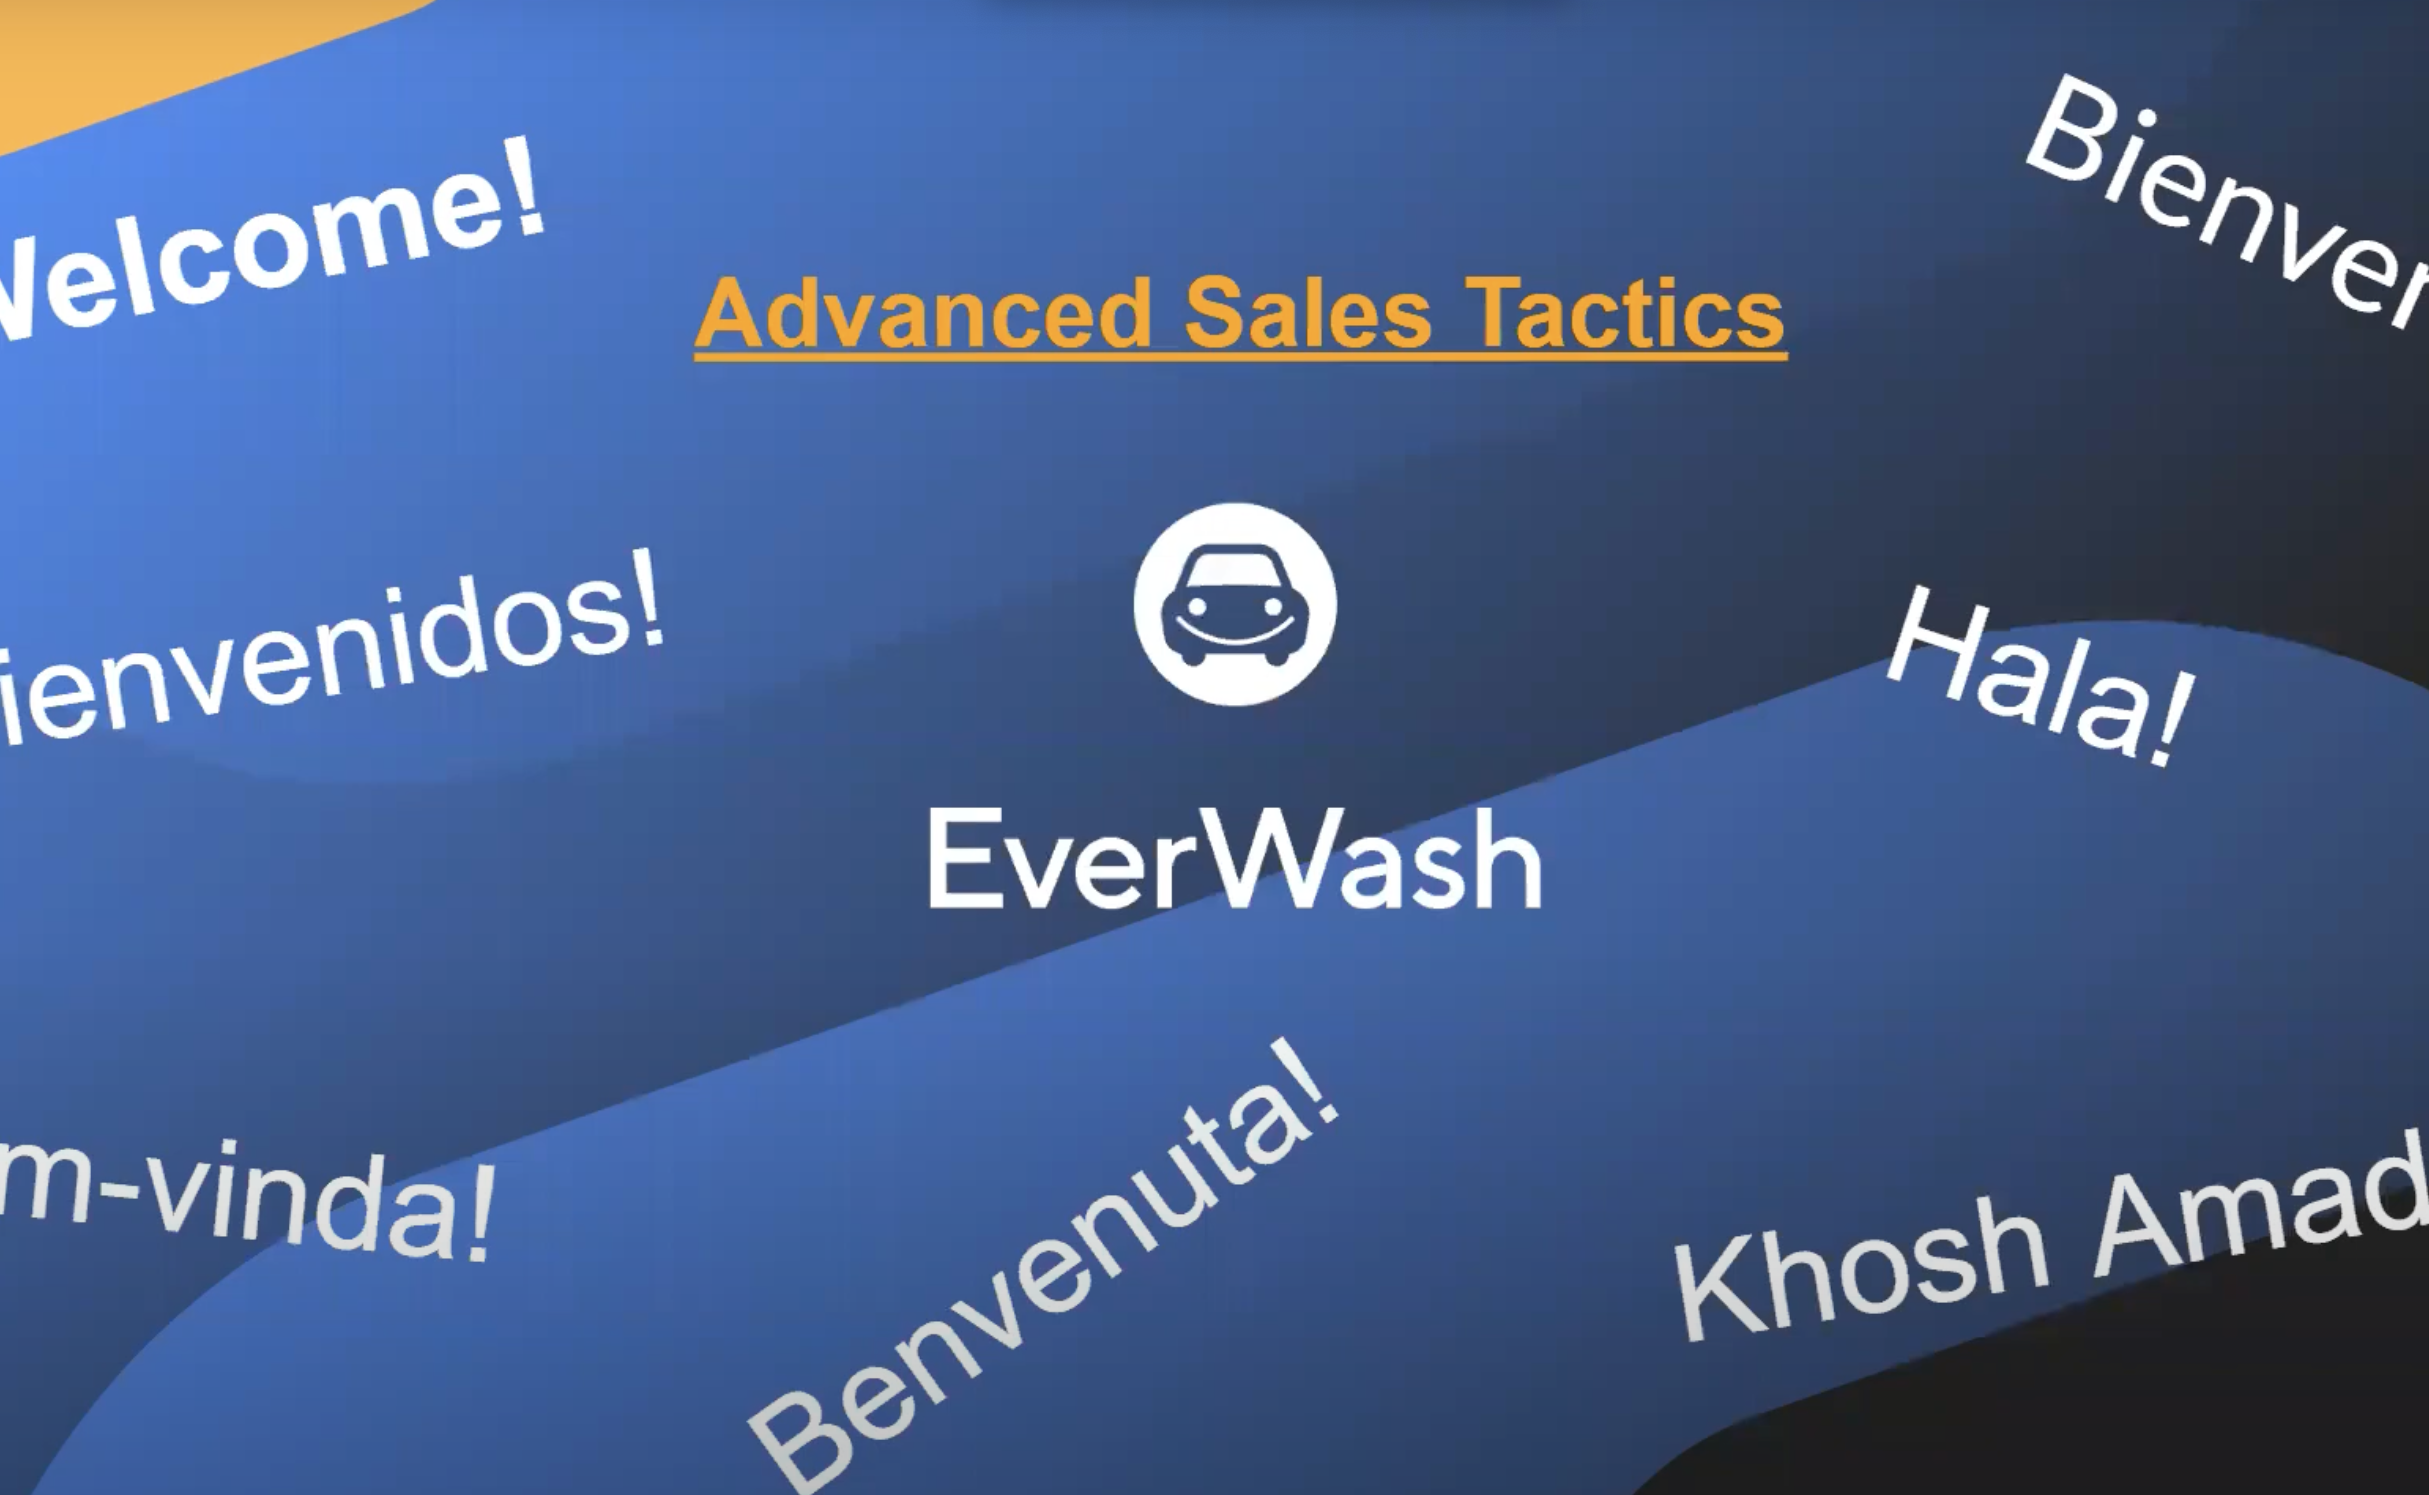 Welcome to EverWash's Advance Sales Training video!